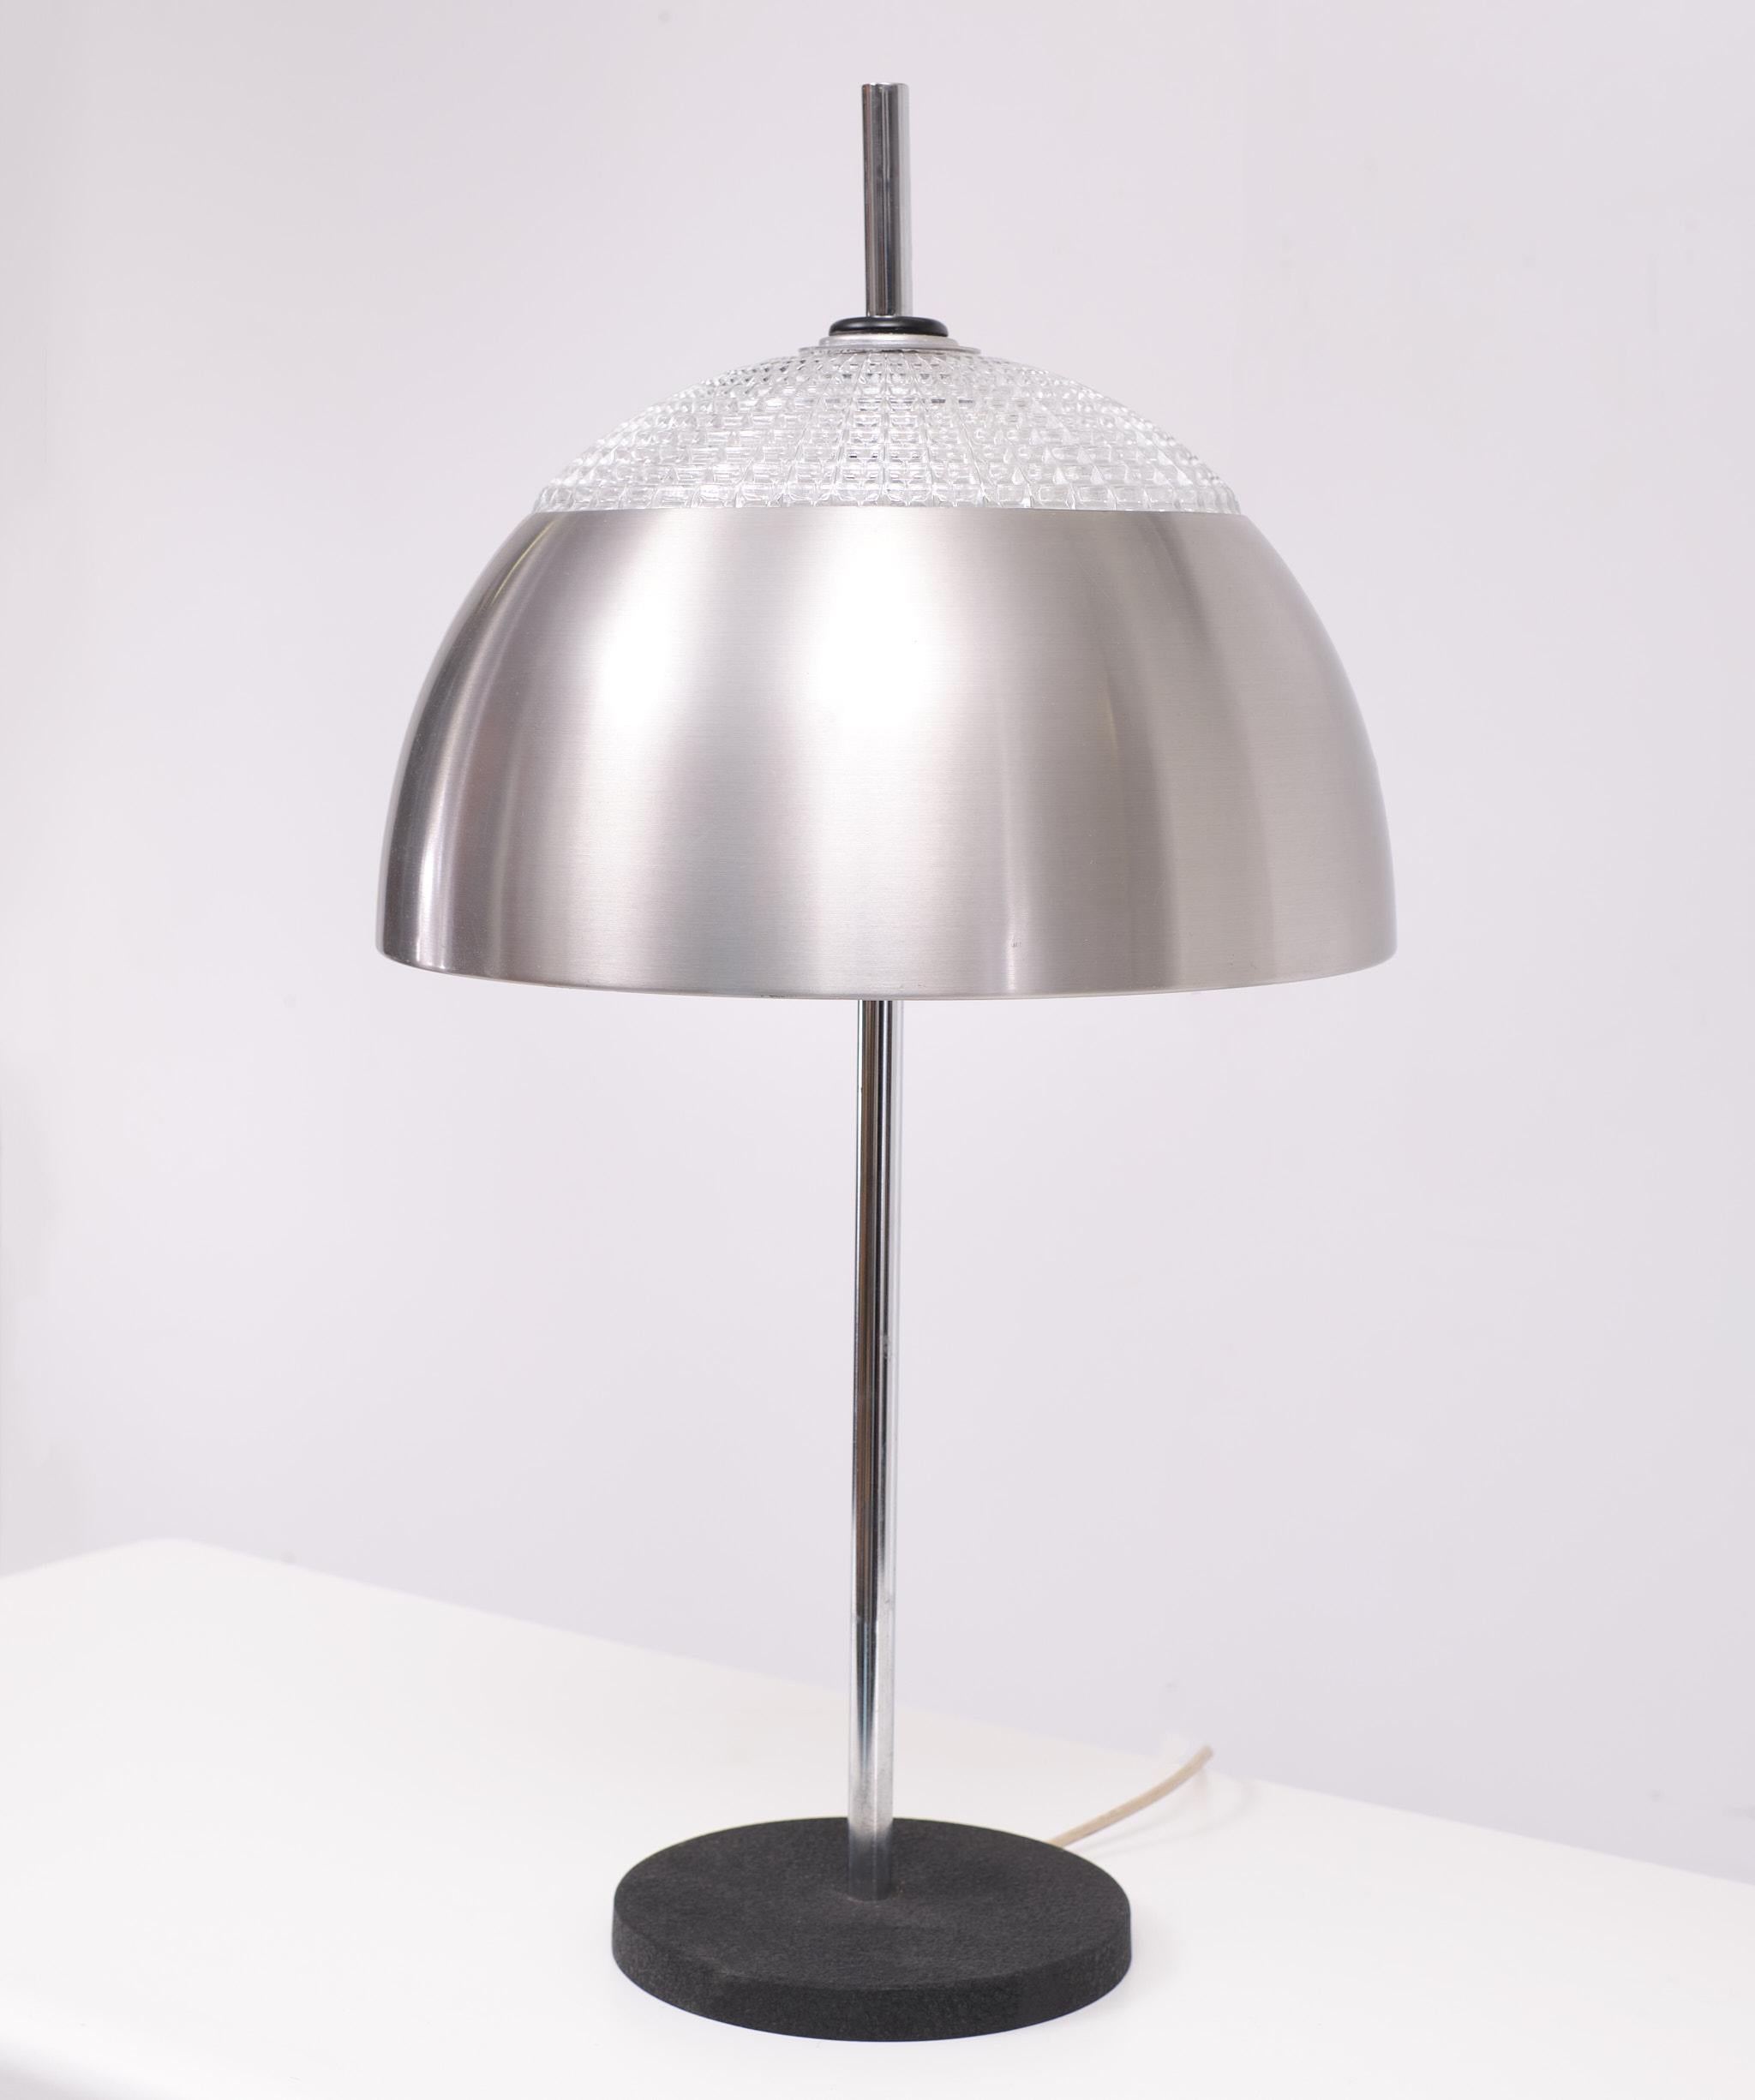 Rare RAAK Sixties Table Lamp D-2088 Inspiration, Holland In Good Condition For Sale In Den Haag, NL